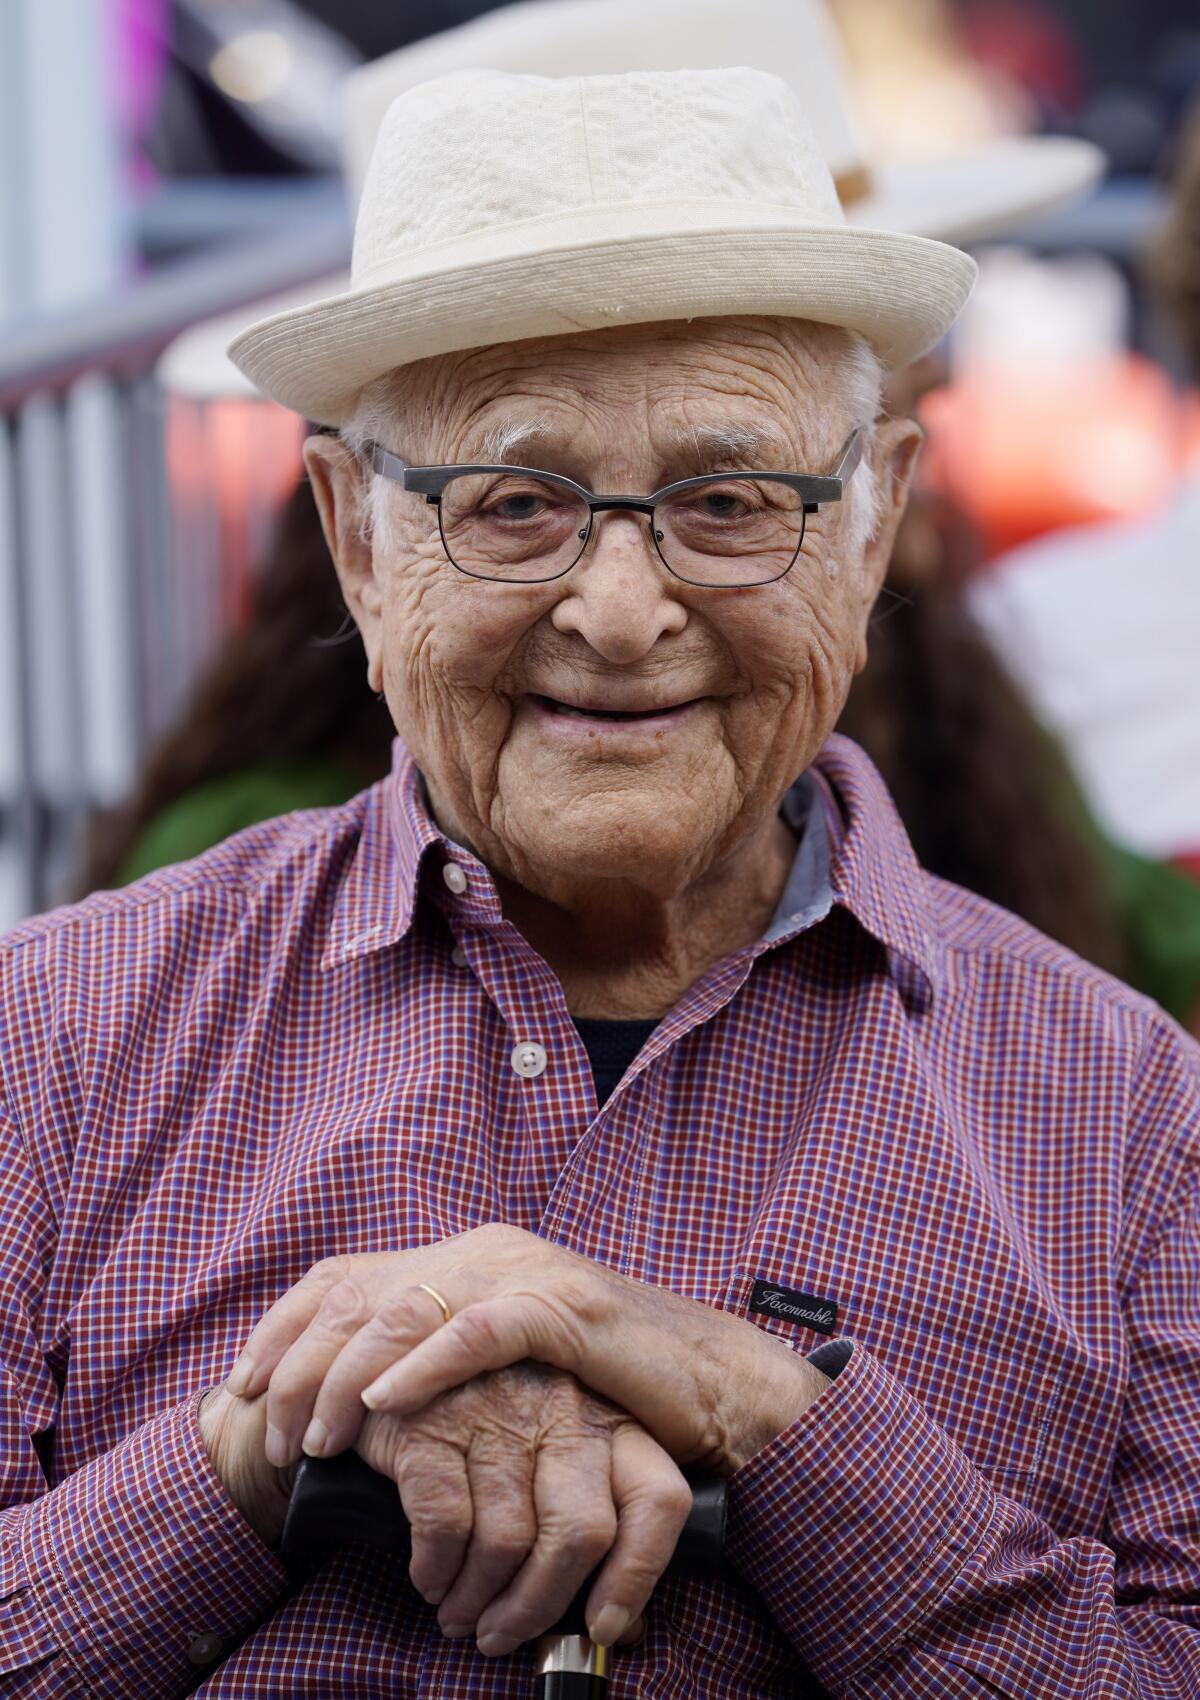 A smiling, older man with glasses, in white hat and red checkered shirt, with hands together 